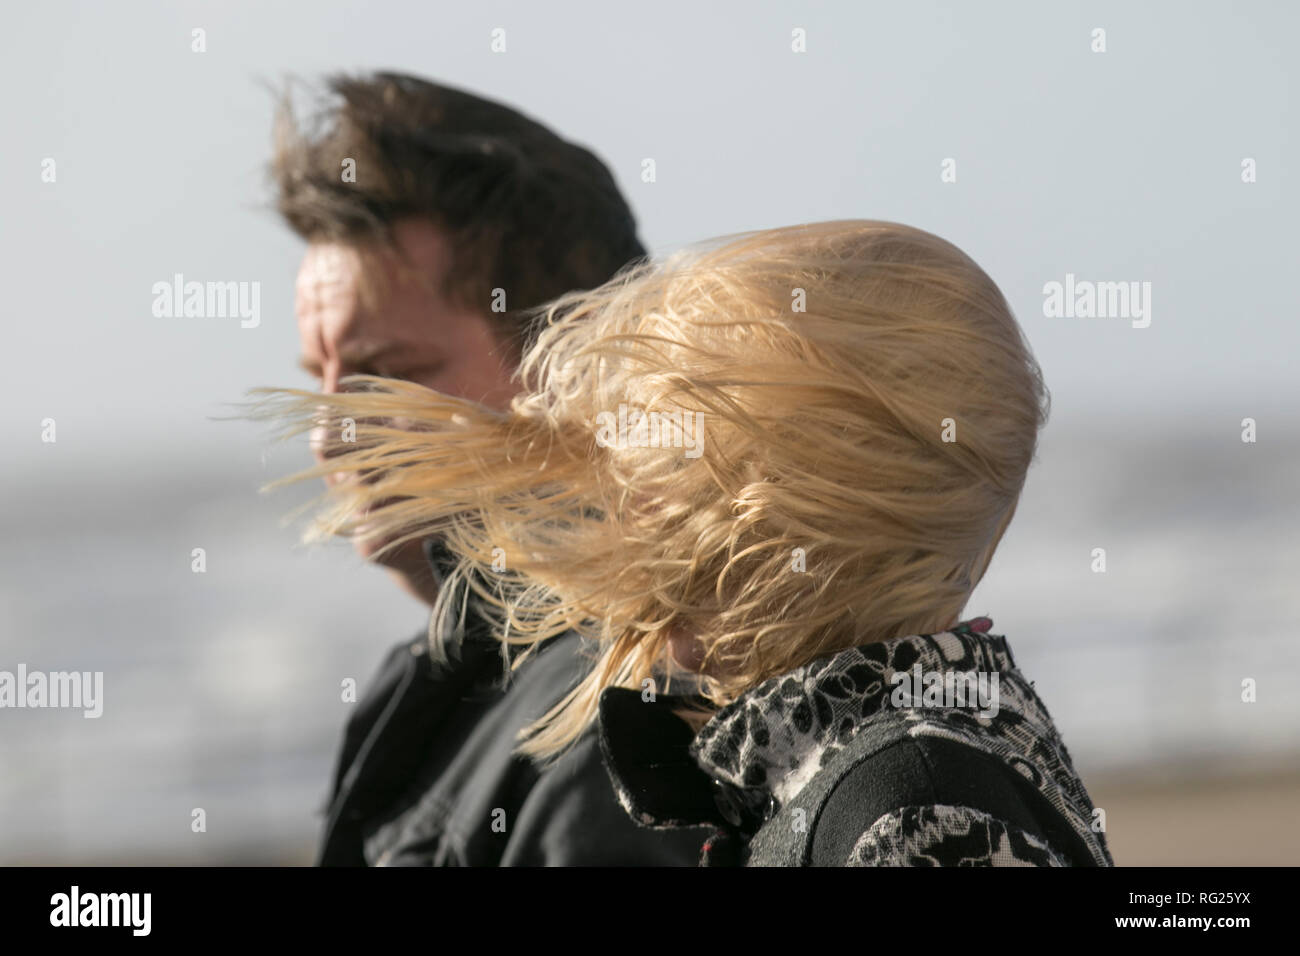 Blackpool, Lancashire. 27th Jan, 2019. UK Weather. Gale force winds at the coast. Visitors to the seaside town have to endure severe winds with pedestrians being blown over on the seafront promenade. Storm , blow, tempest, flyaway hair, tangled tresses, bad hair day on the seafront promenade. Credit:MediaWorldImages/AlamyLiveNews Stock Photo